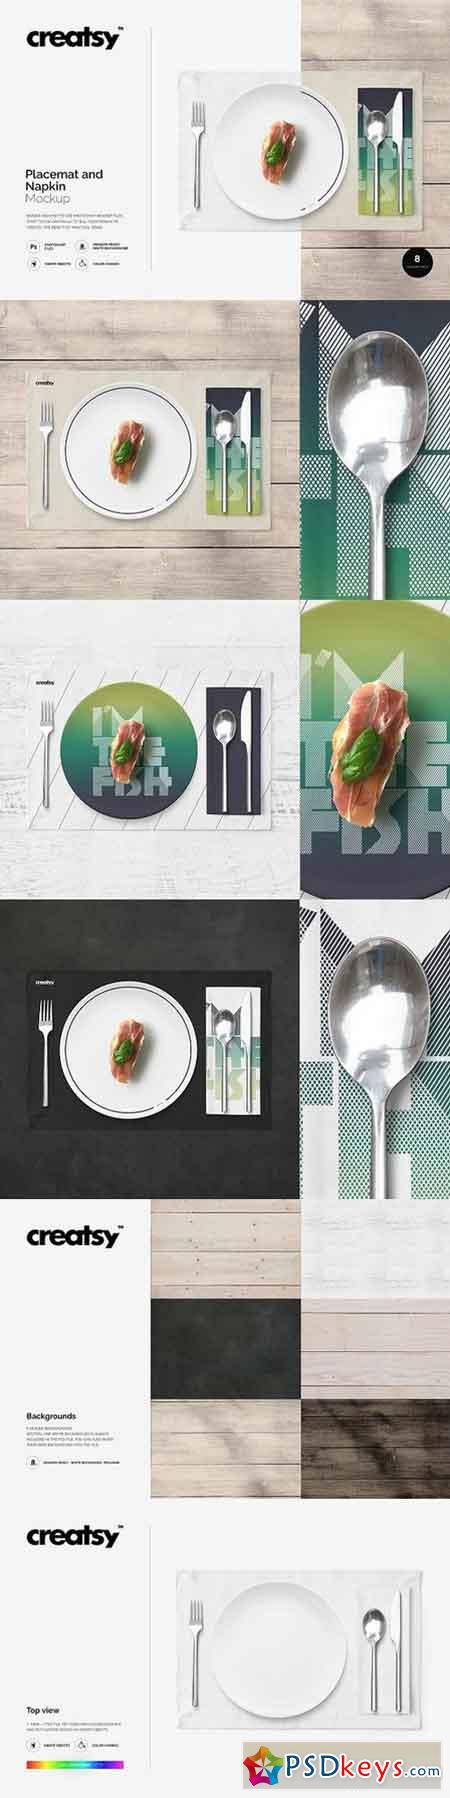 Placemat and Napkin Mockup 1142076